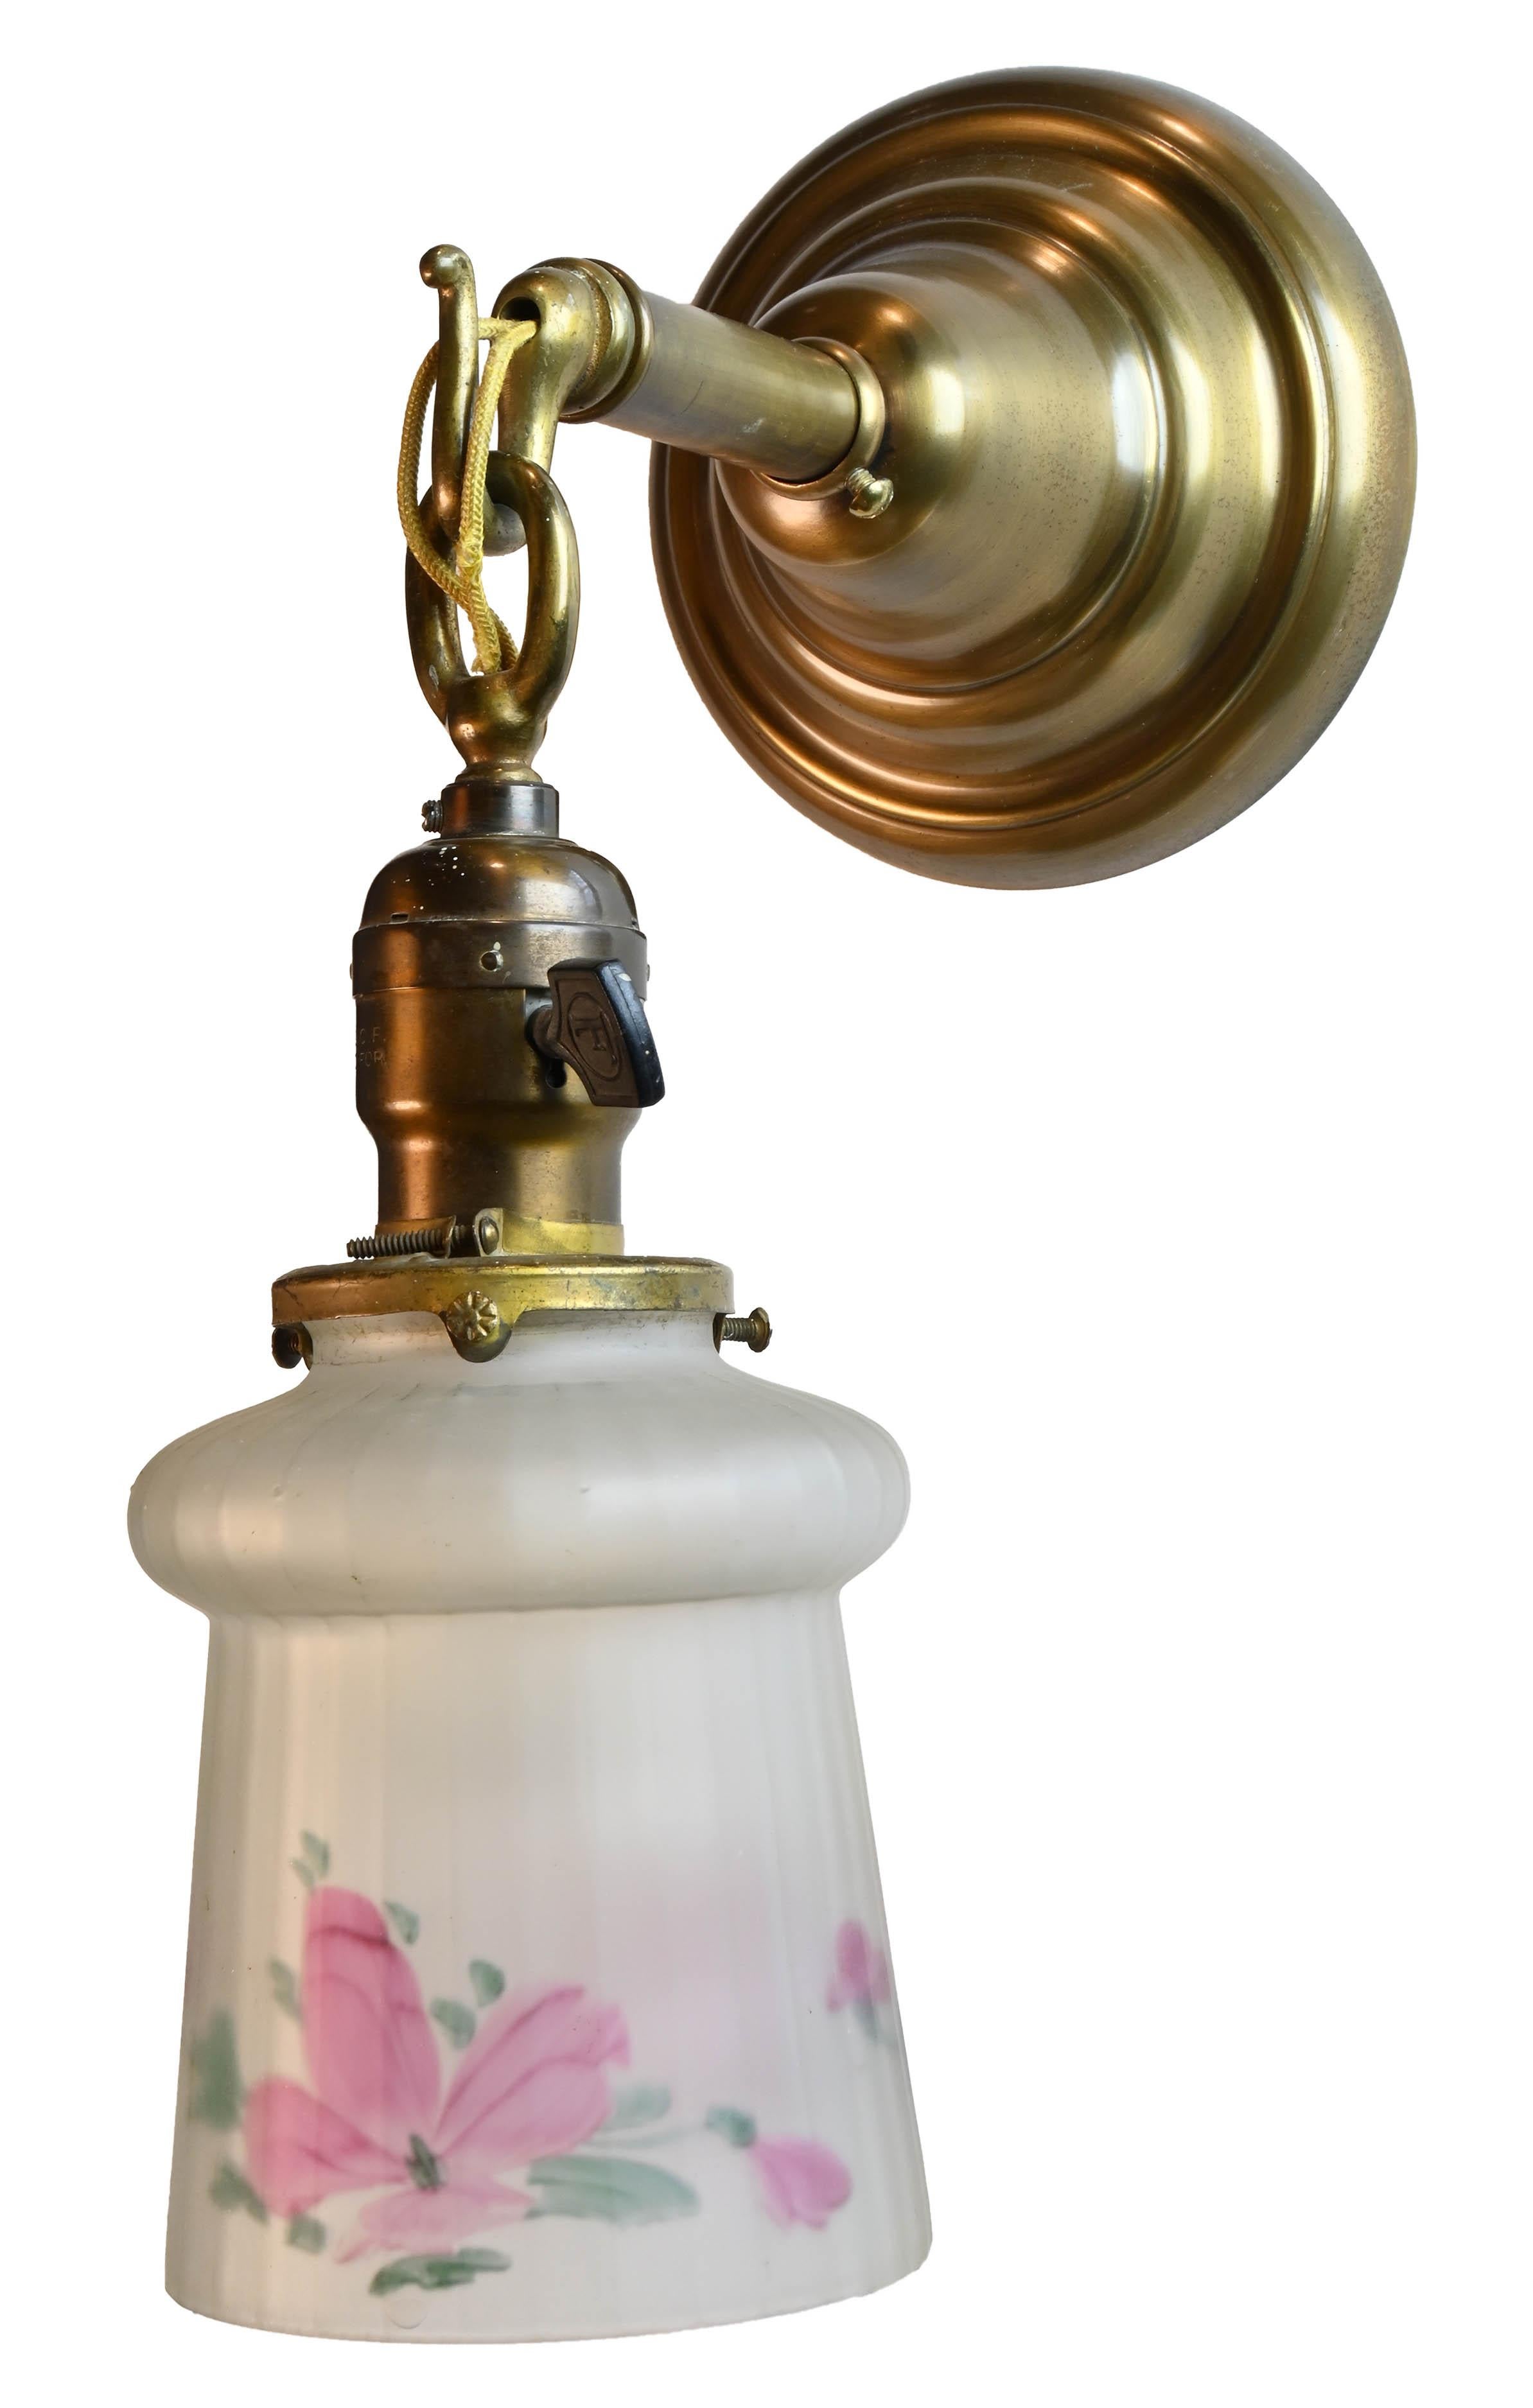 Beautiful rounded Mission sconces with hand painted pink floral glass shade.

Illumination: Single Edison socket 

Sconce dimensions: 5” wide x 12” tall with shade by 9” projection
Reverse hand painted shade dimensions: (5” tall by 4” wide,